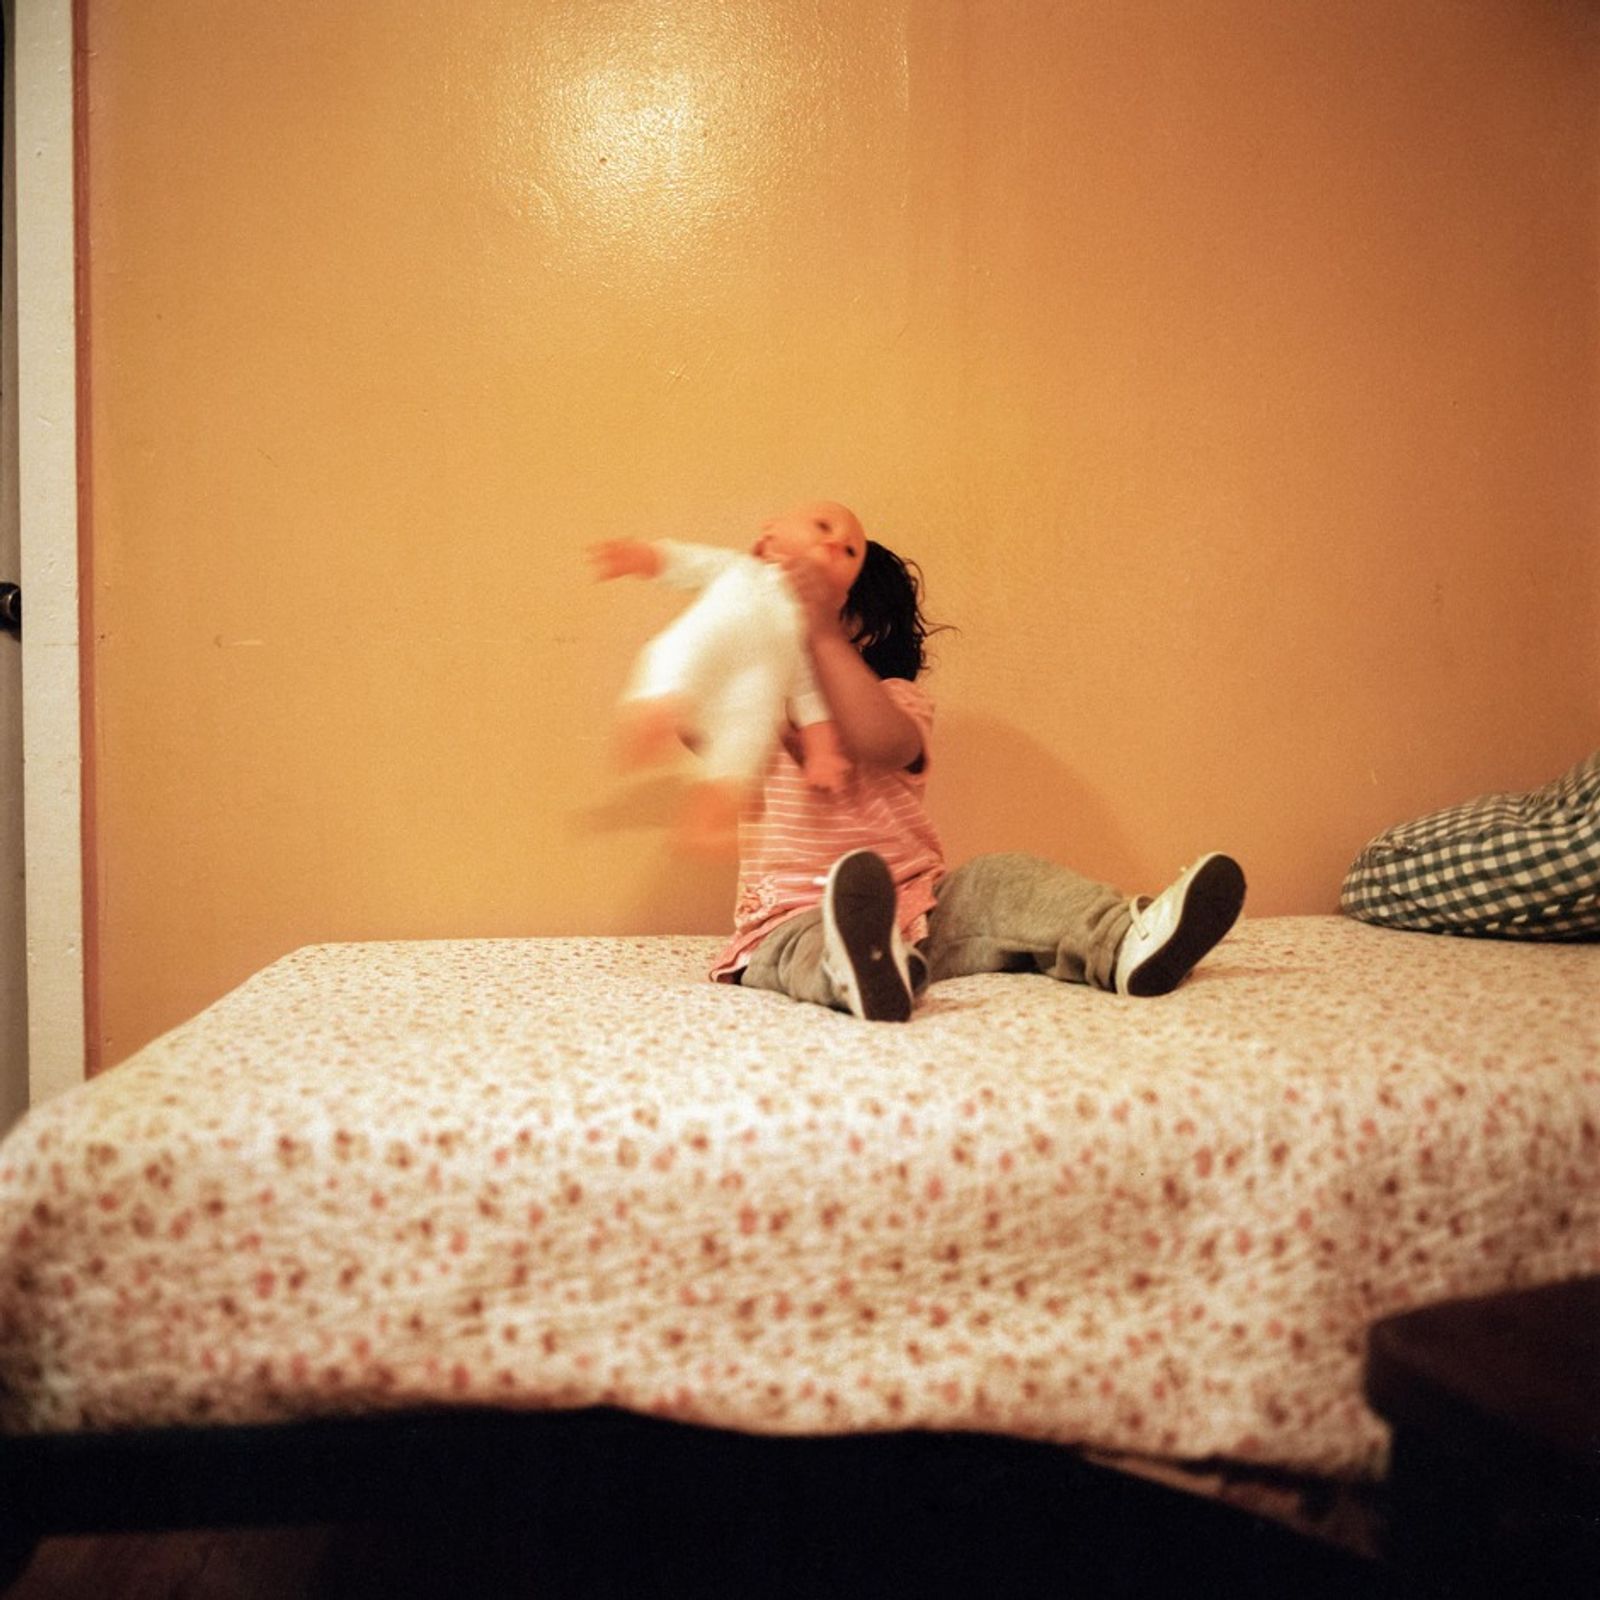 © Ruth Prieto - Image from the Safe Heaven (Yellow)  photography project